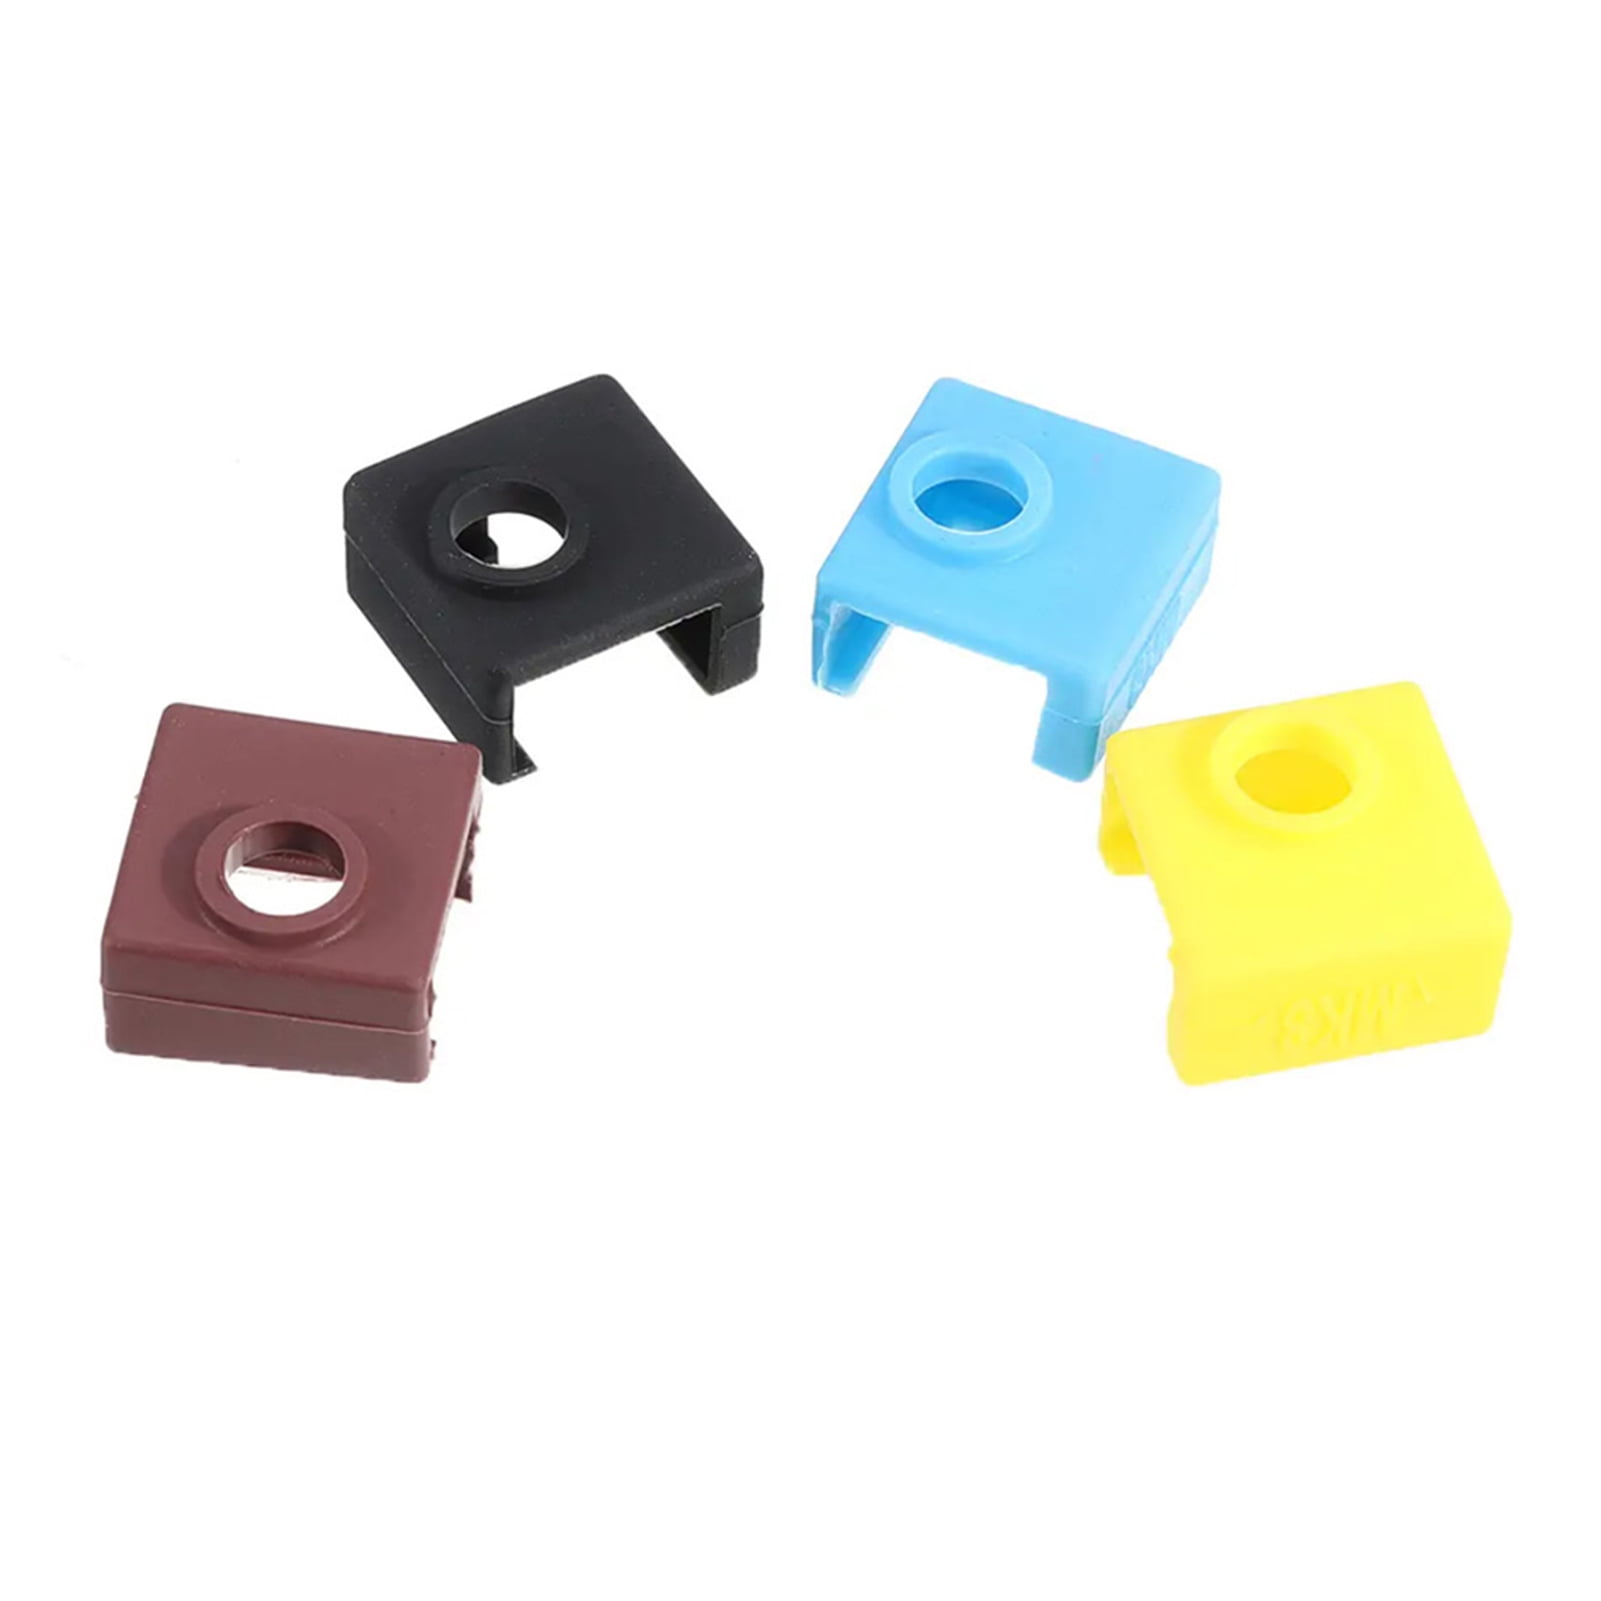 3x 3D Printer Heater Block Silicone Cover Sock for Creality CR-10,10S,S4,S5 